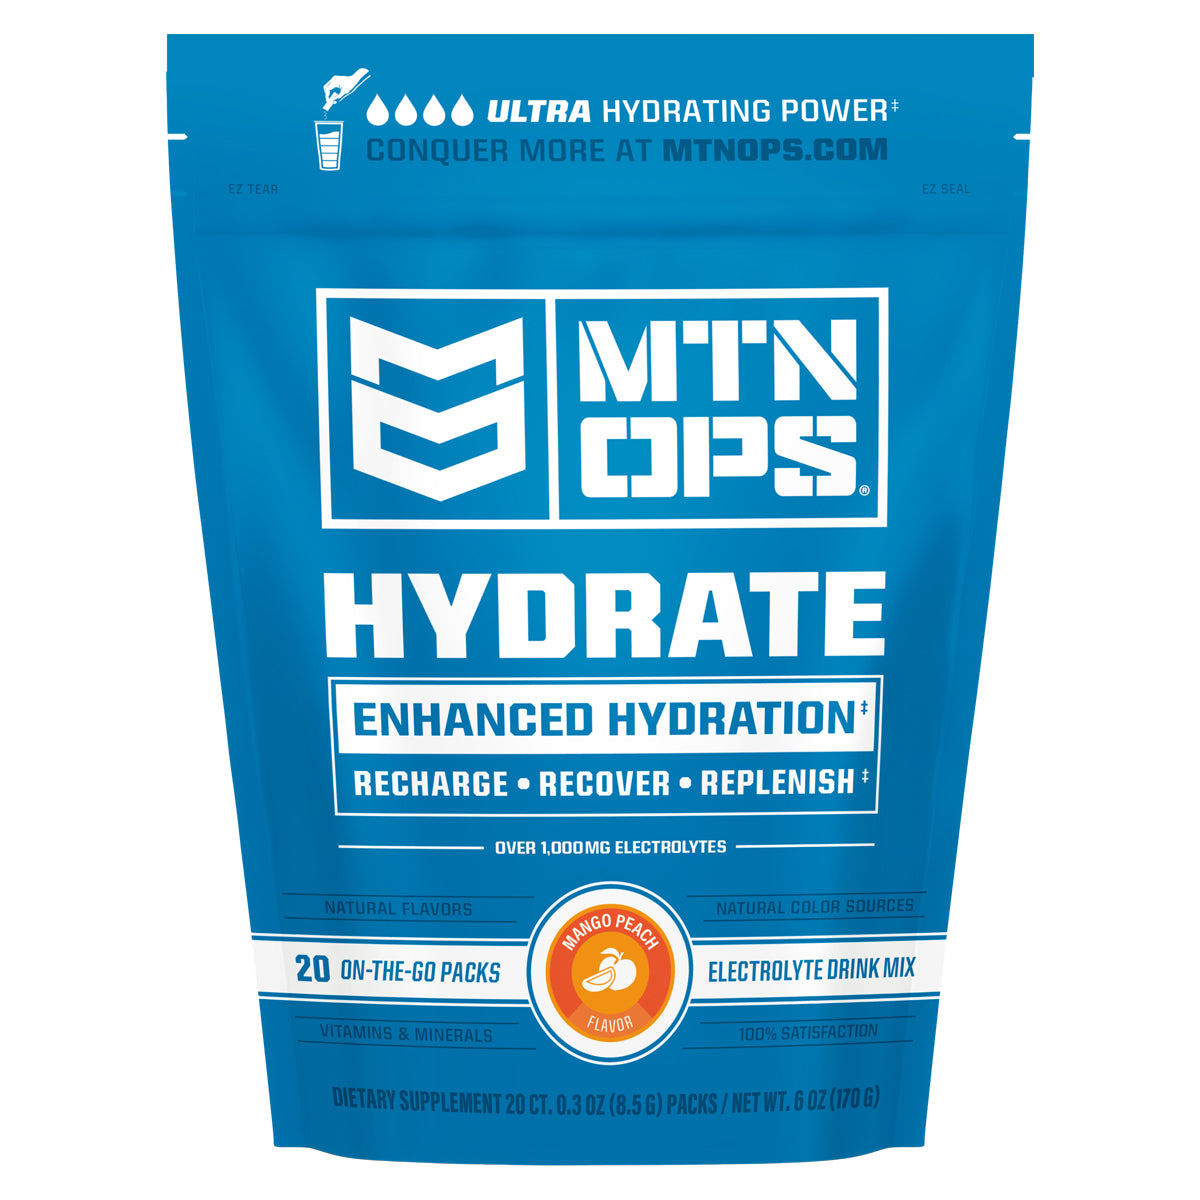 Recharge with the power of hydration